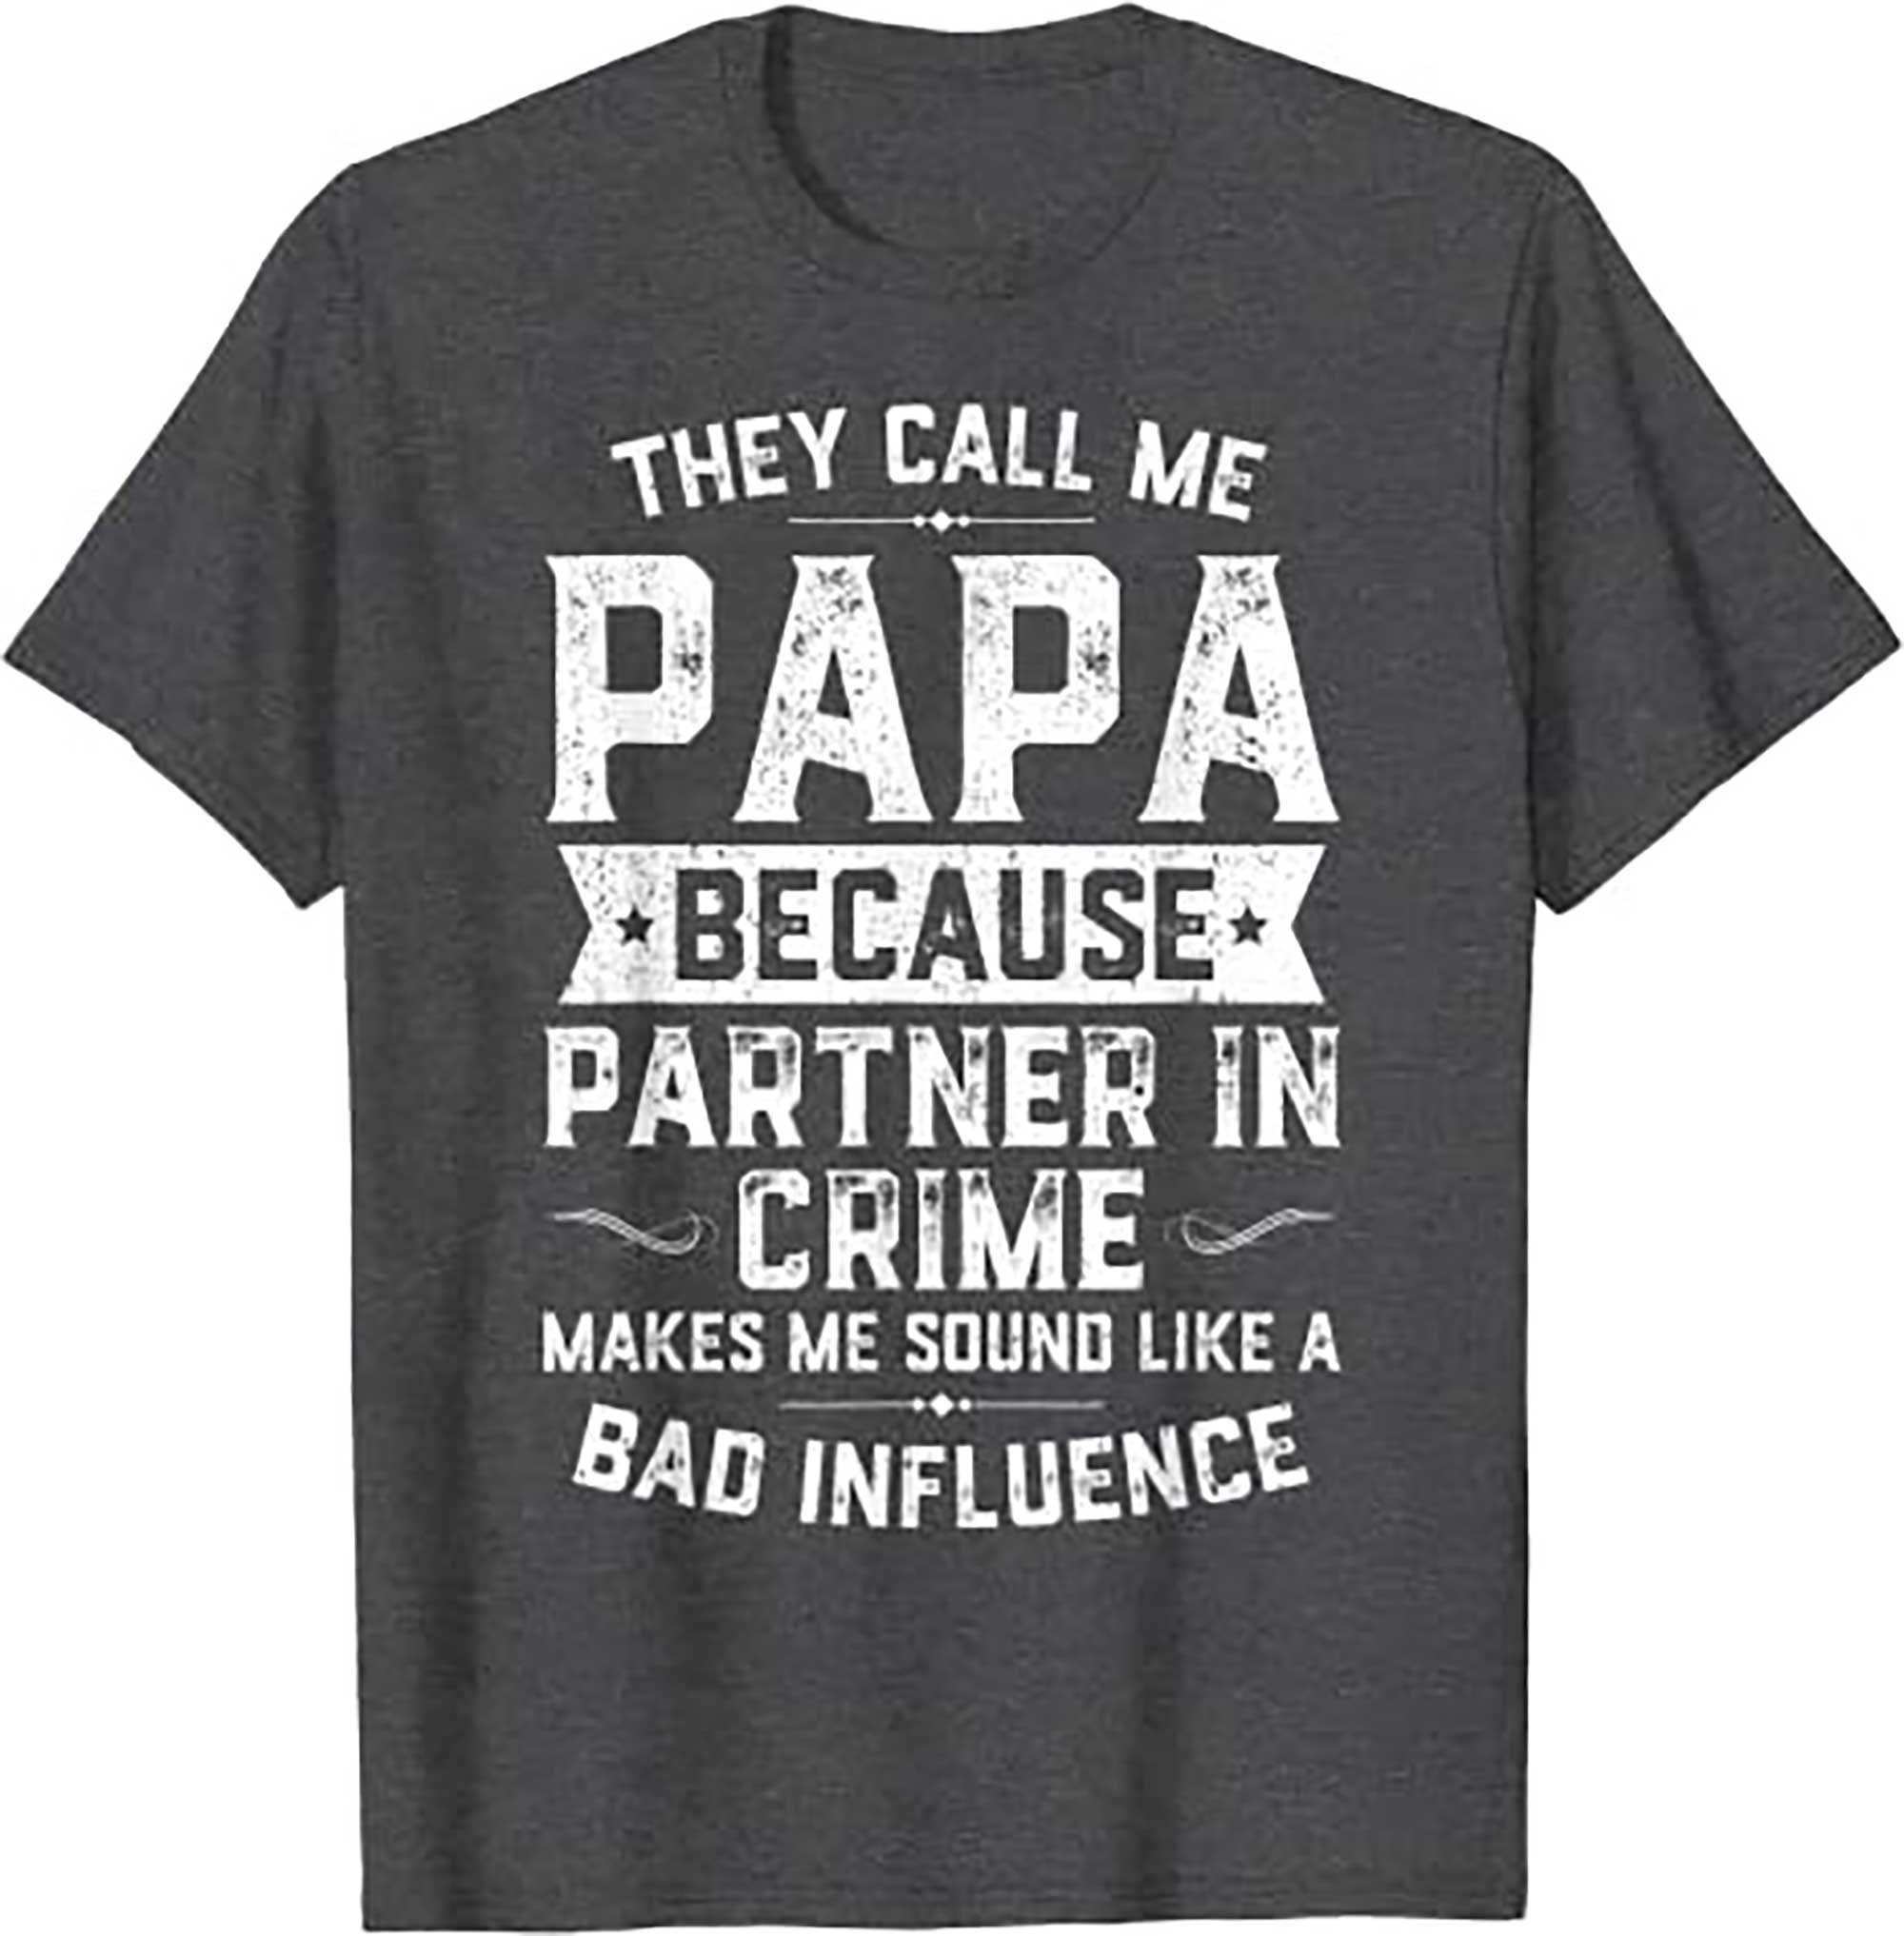 Skitongift They Call Me Papa Because Partner In Crime Shirt Fathers Day T Shirt